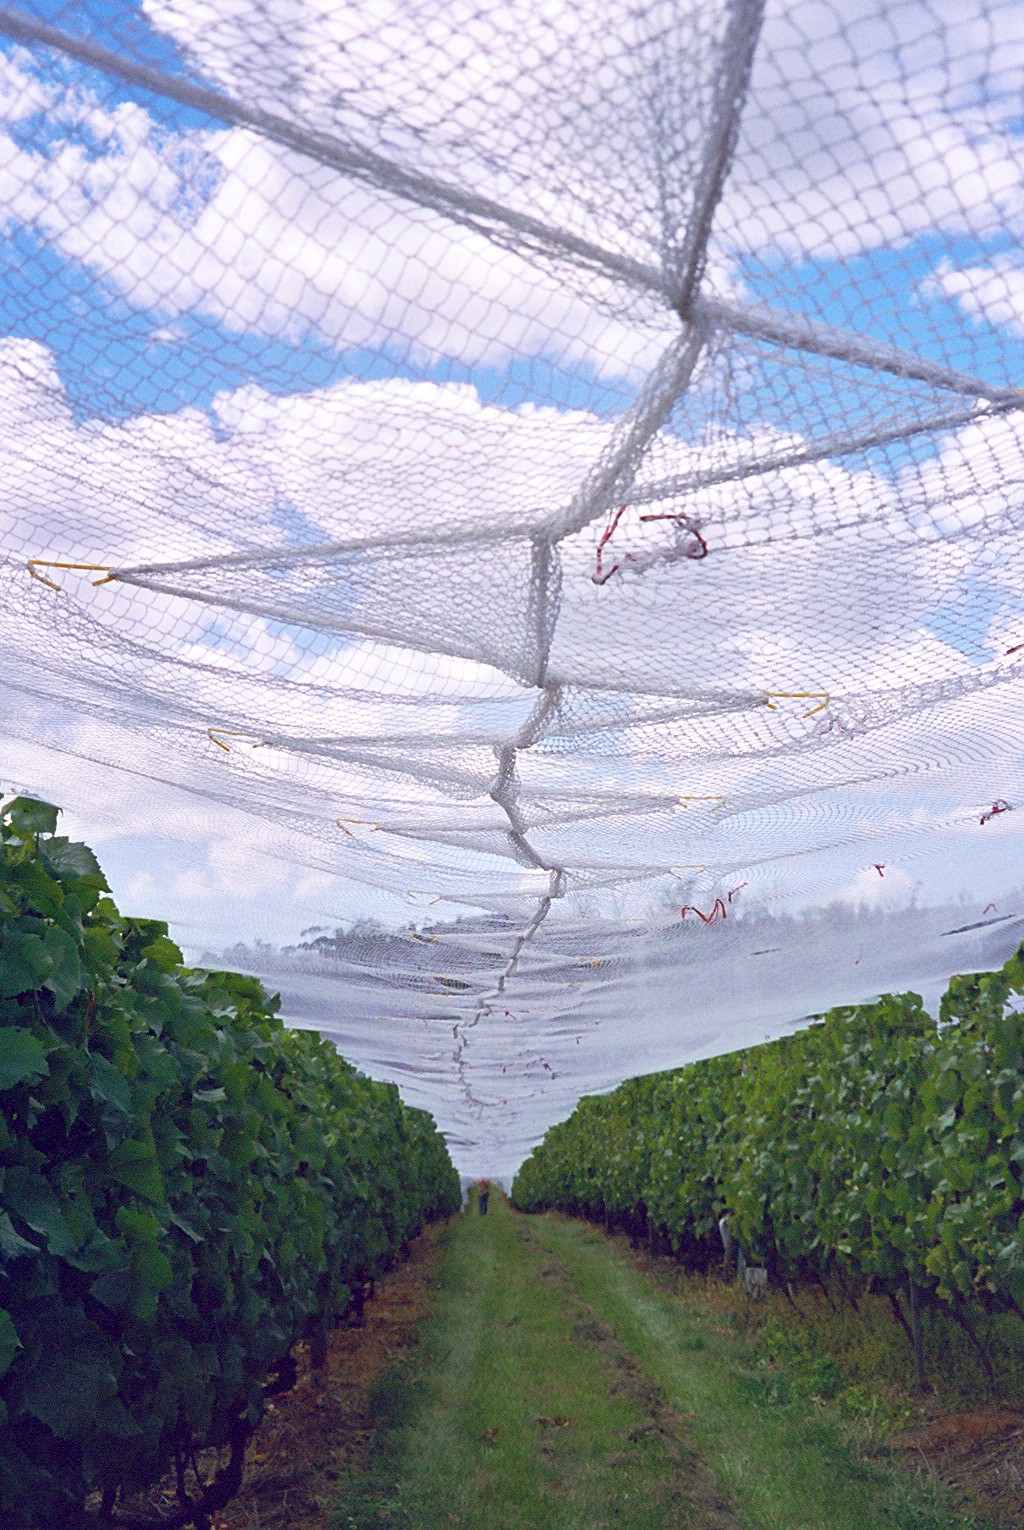 Net Clip Underview of Covered Orchard